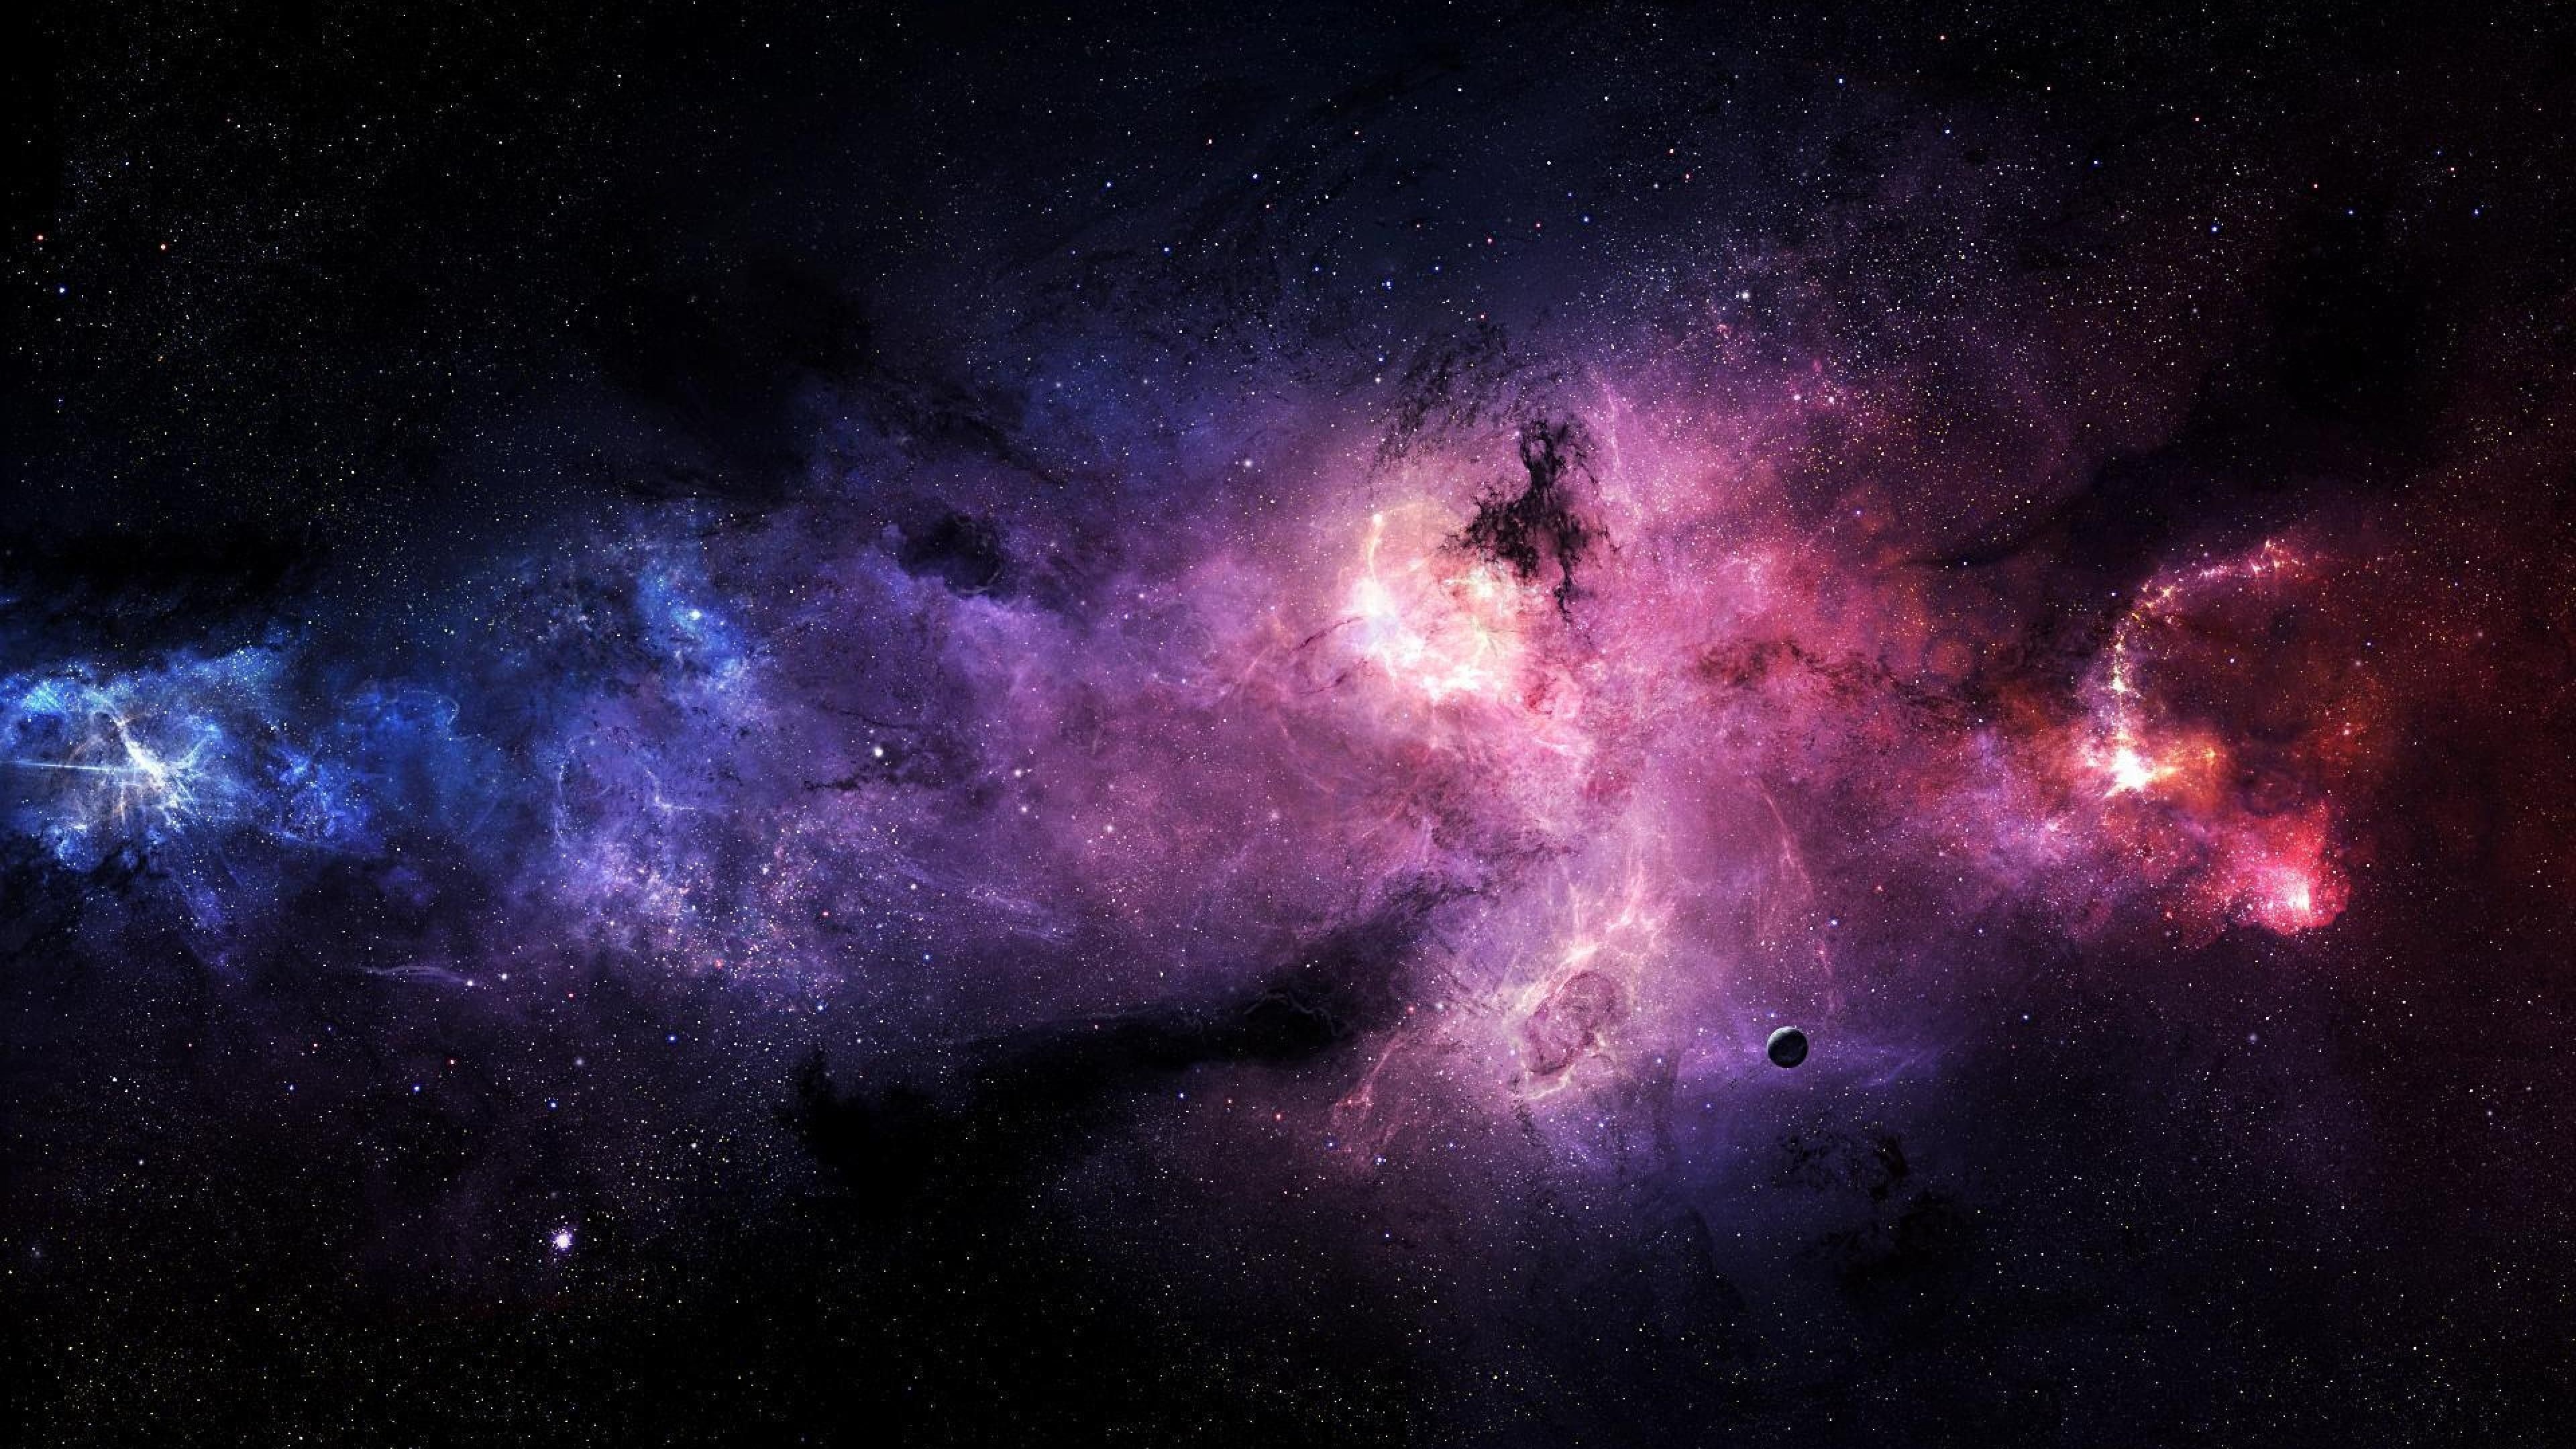 Universe, Stunning space backgrounds, Astral beauty, Enigmatic cosmos, 3840x2160 4K Desktop